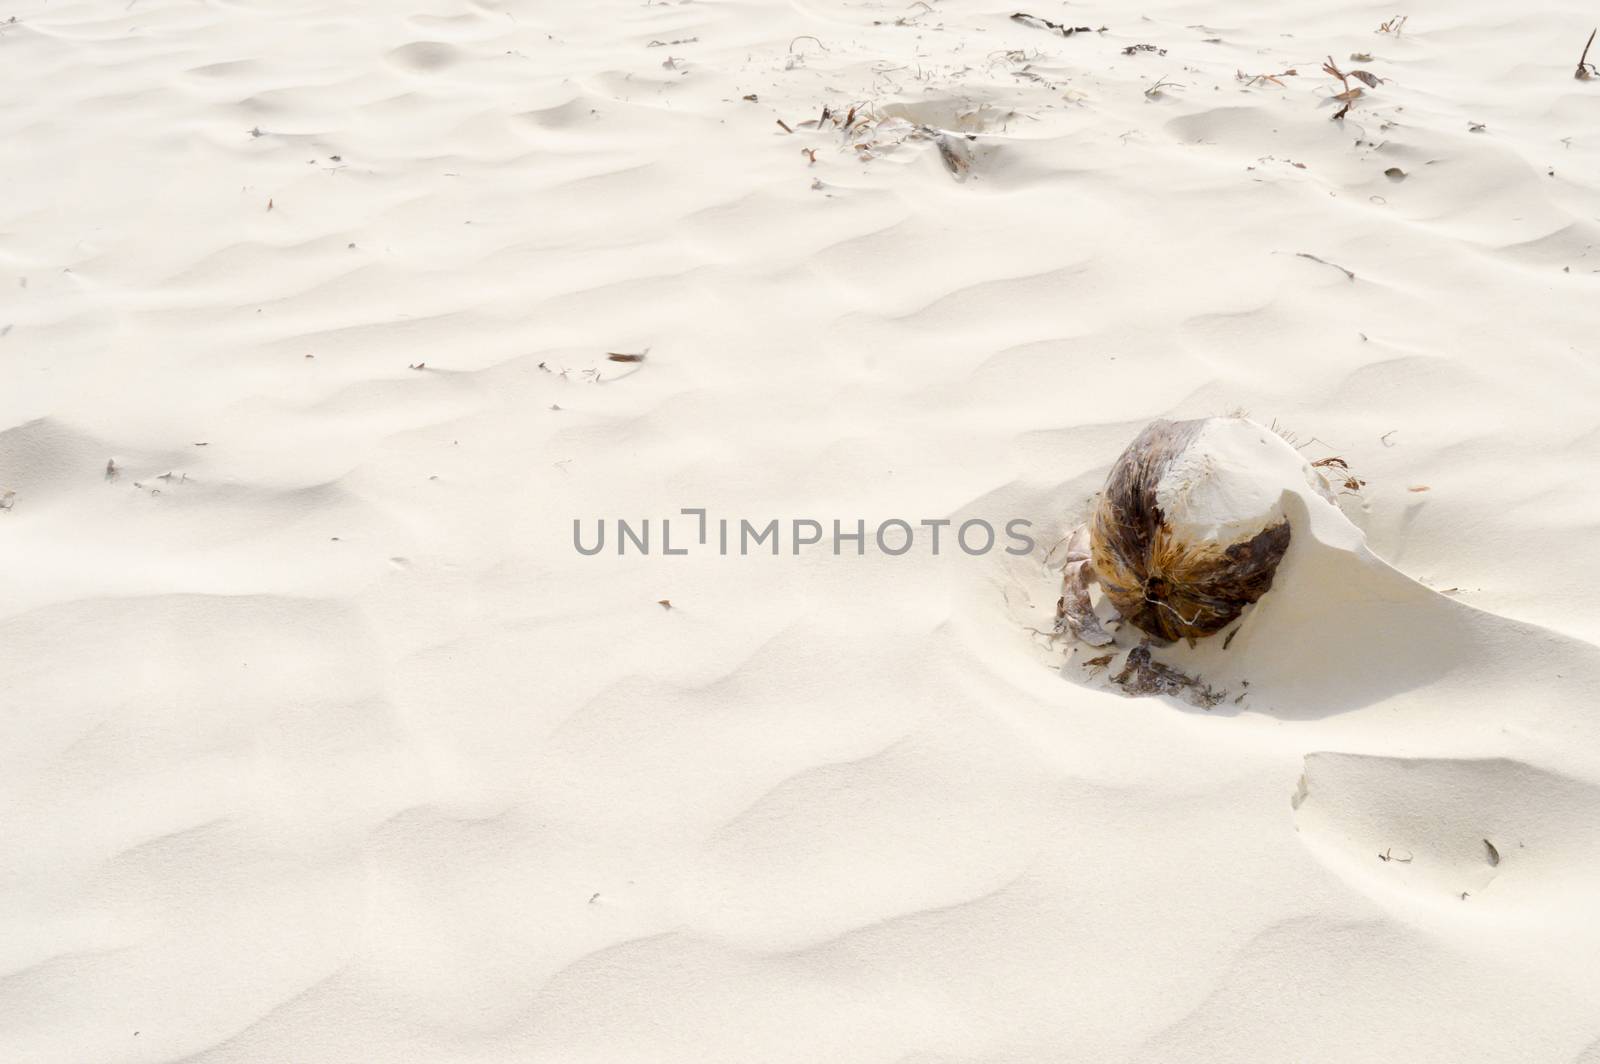 Coconut covered with fine sand by the wind on the beach of Bamburi in Kenya